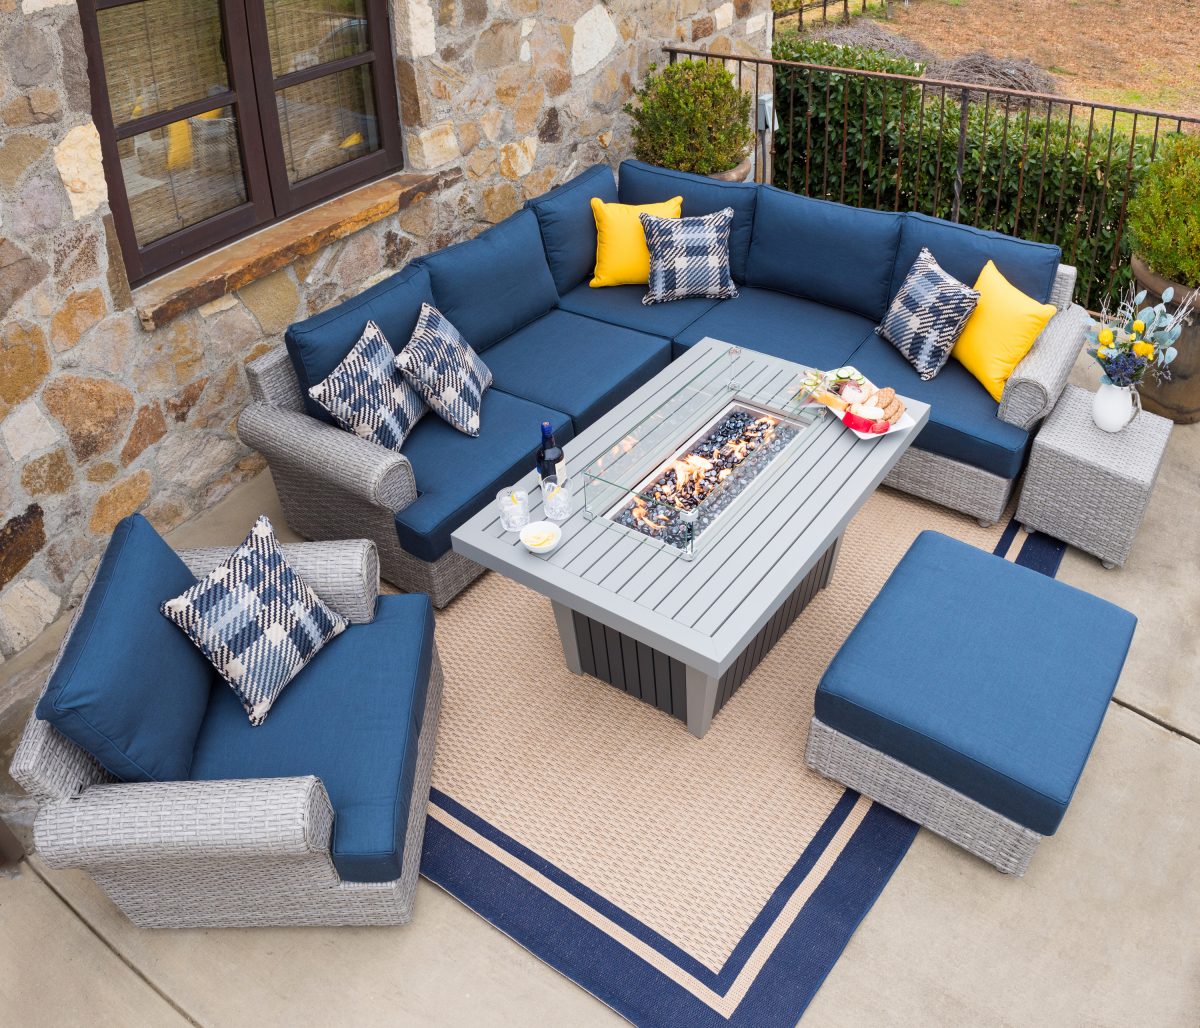 Eight Tips For Arranging Patio Furniture Like A Pro